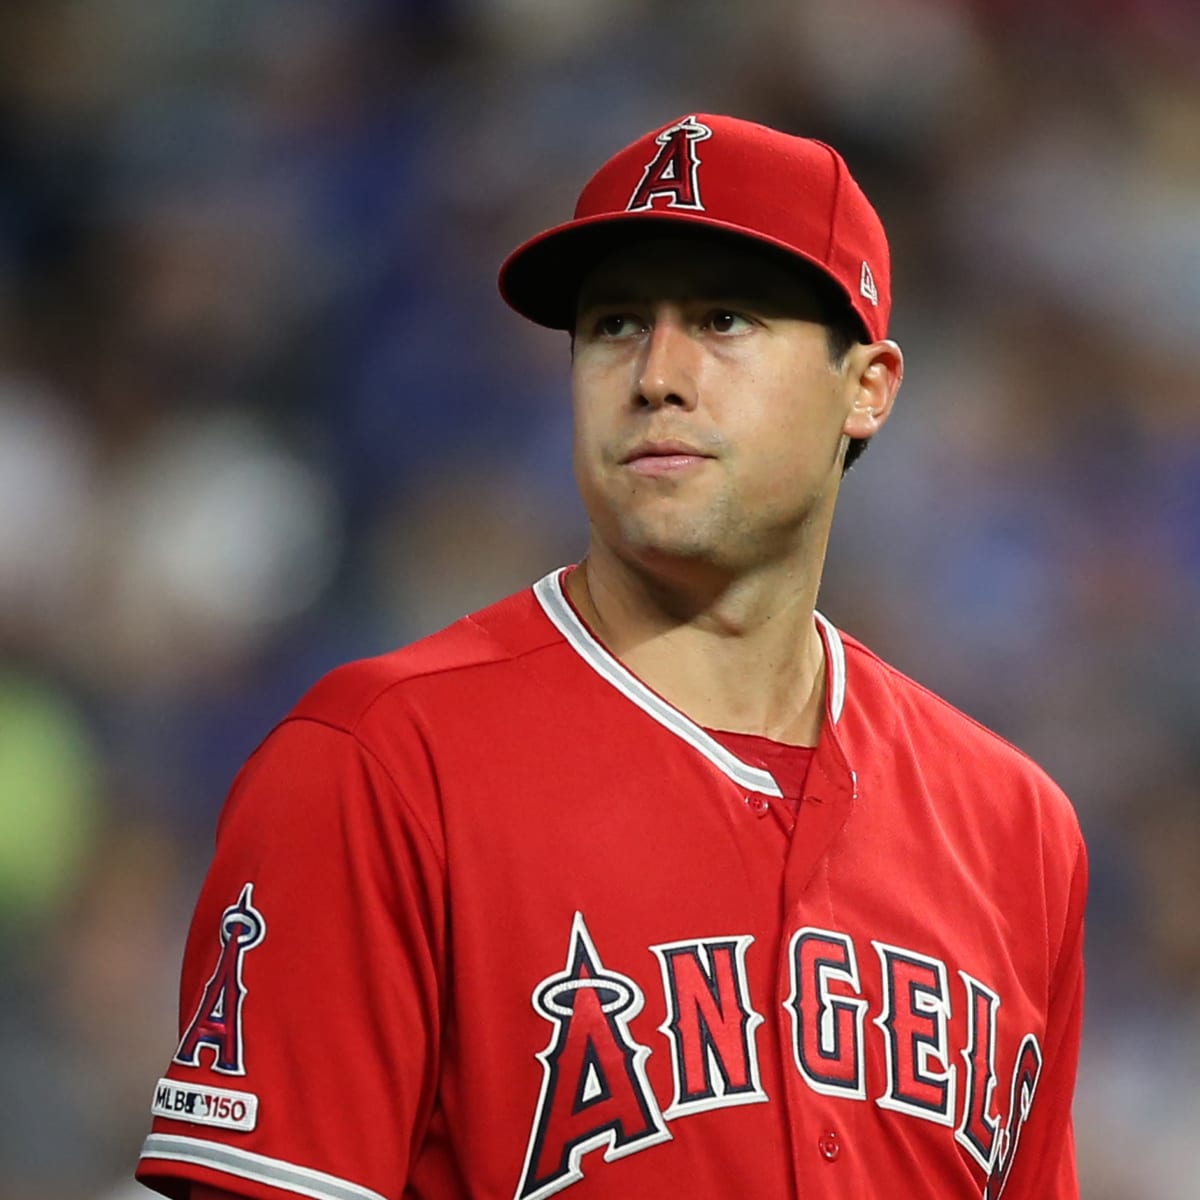 Tyler Skaggs another casualty of America's opioid epidemic